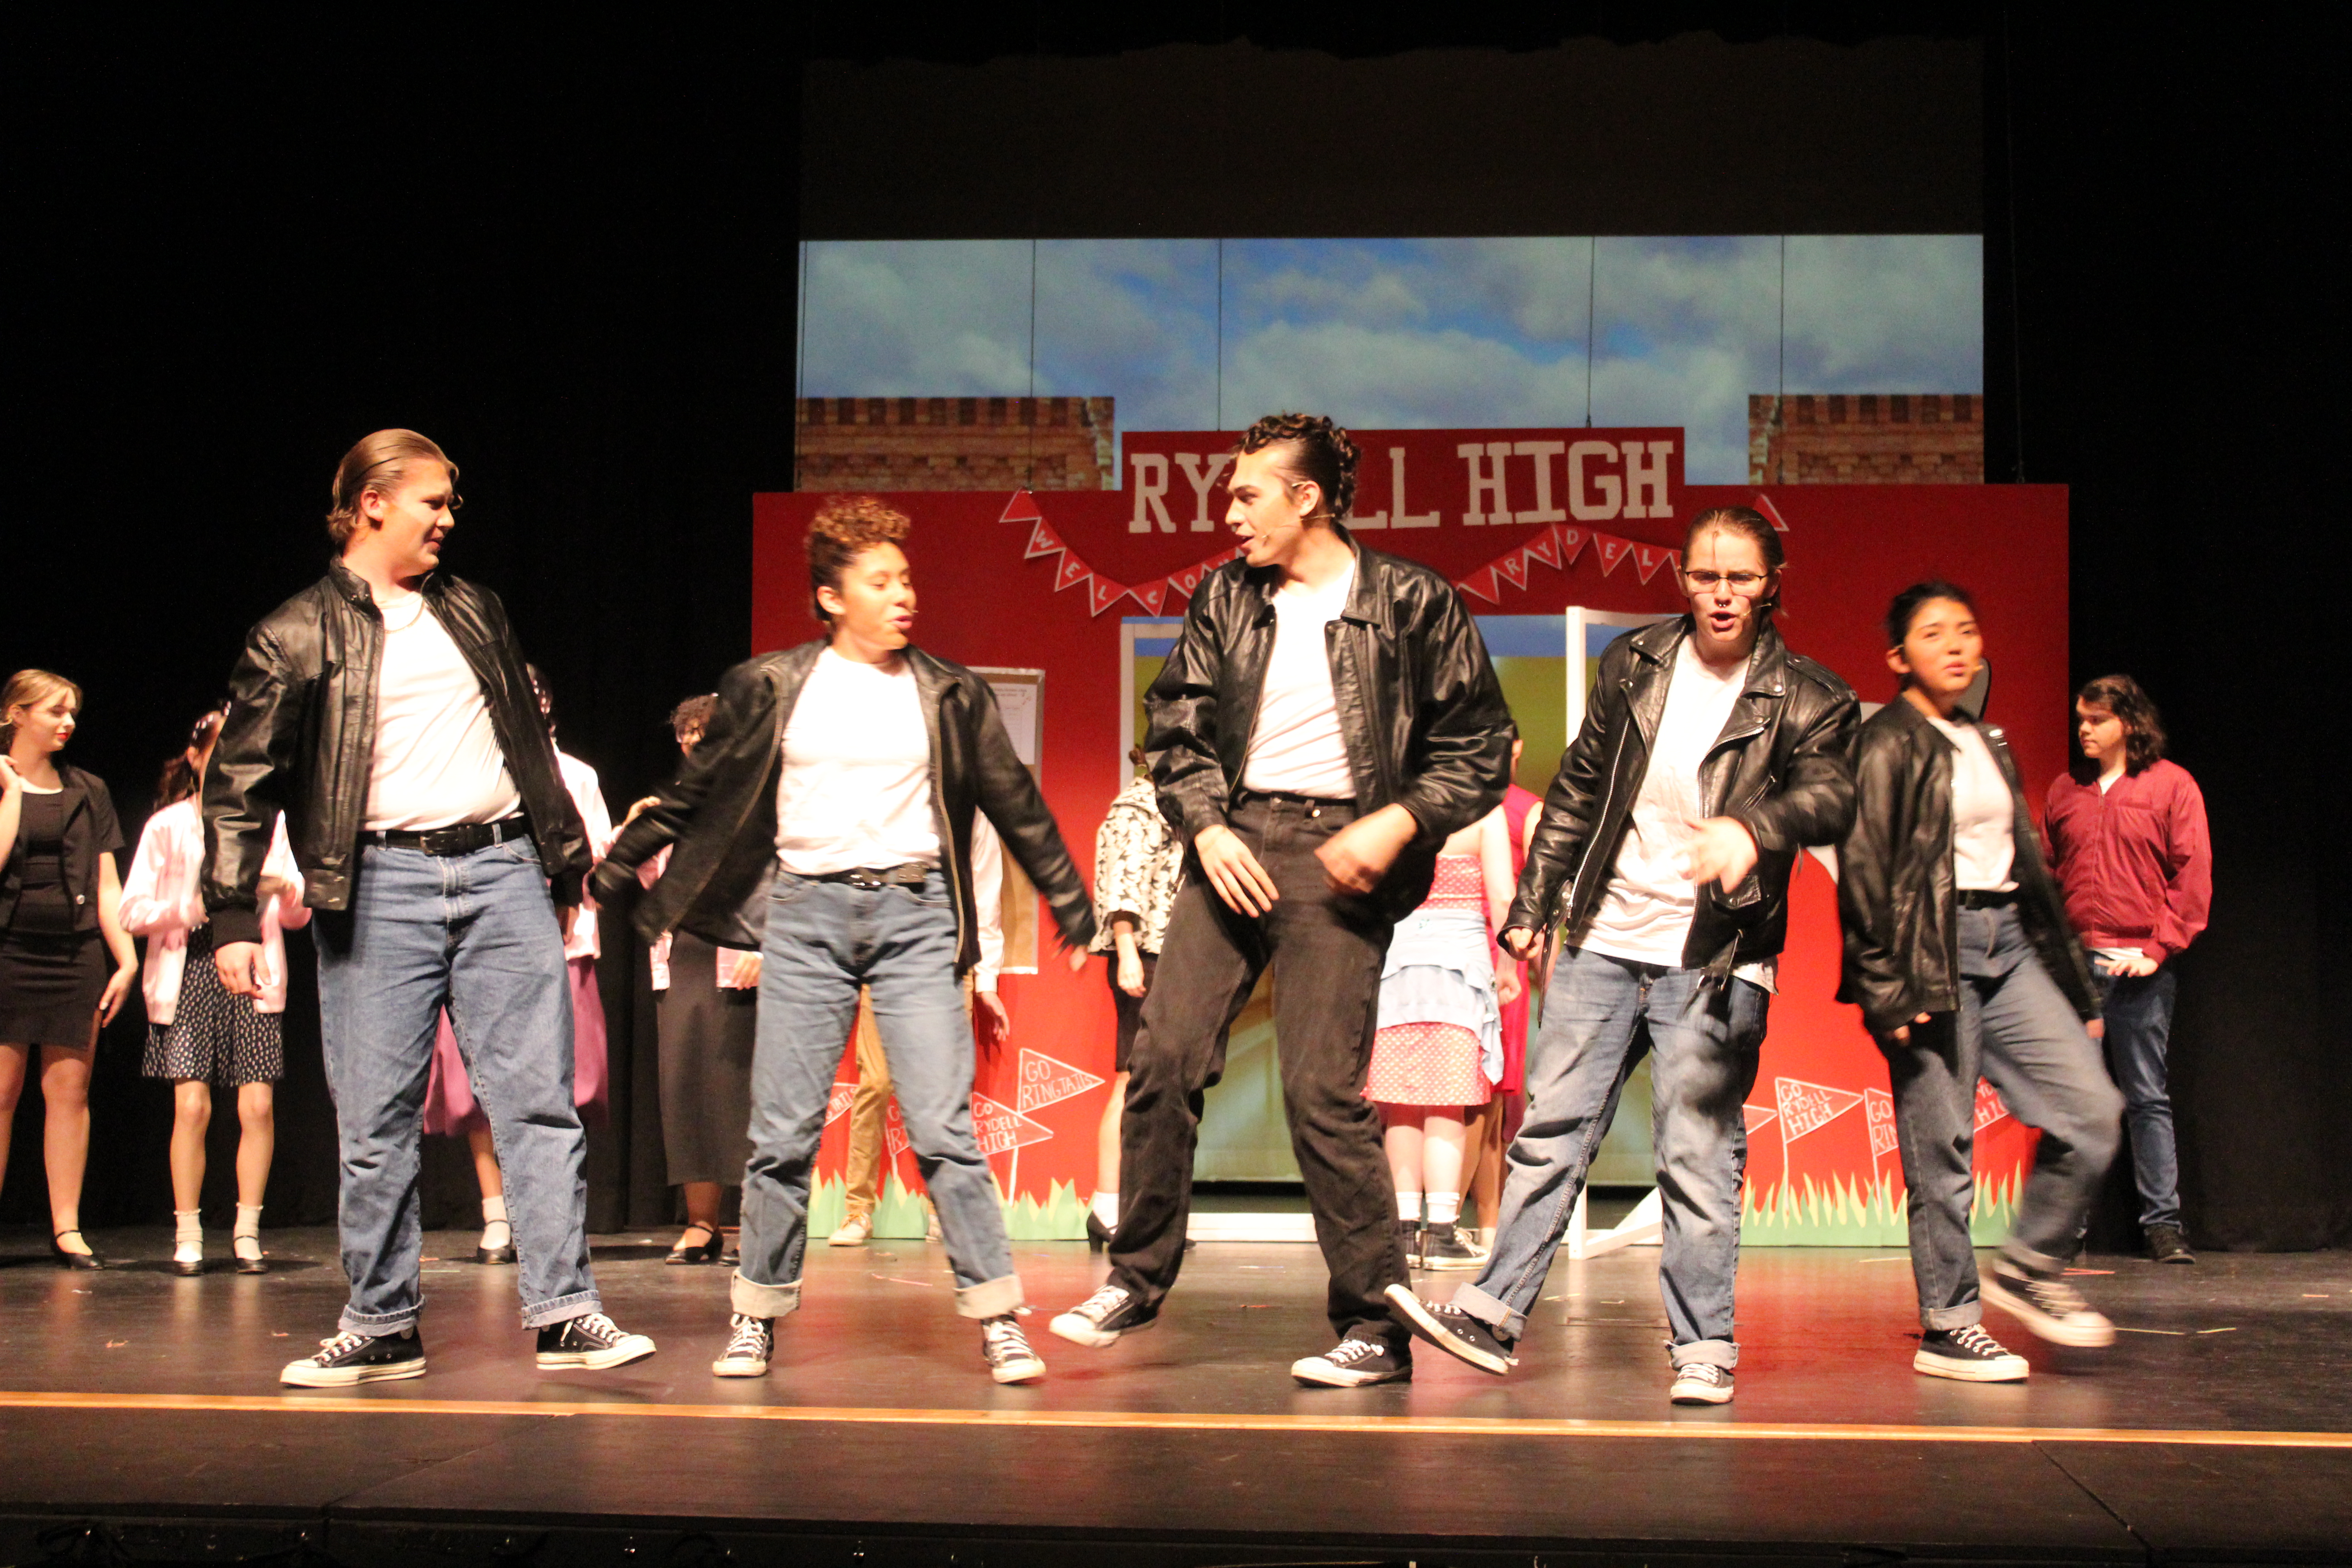 Grease will open this Friday on stage at Swain Arts Center. Students playing Greasers are pictured in the show's opening song. From left is Hunter Smith, Eva Bottchenbaugh, Luca Crawford, Memphis Taylor, and Cecilia Solano Jumper.